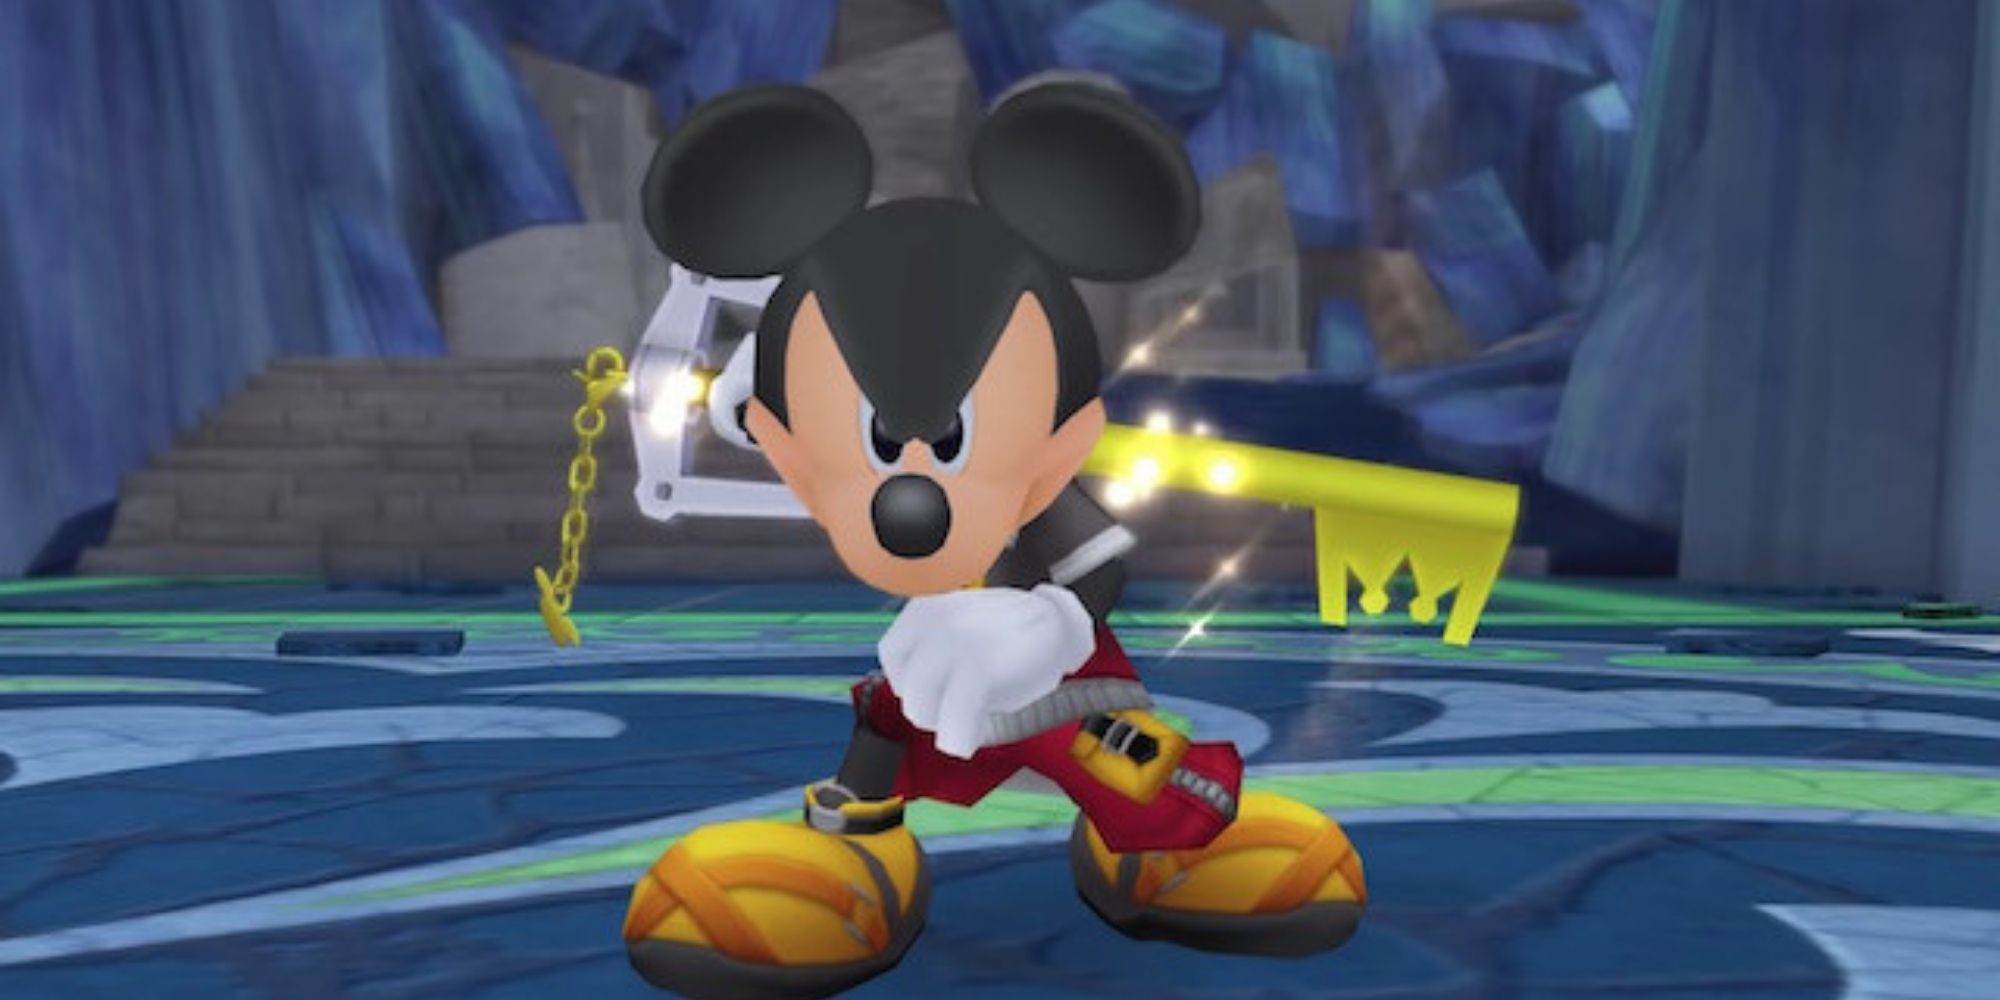 Kingdom Hearts Mickey Mouse Prepares To Attack With His Keyblade Inside a Ruin